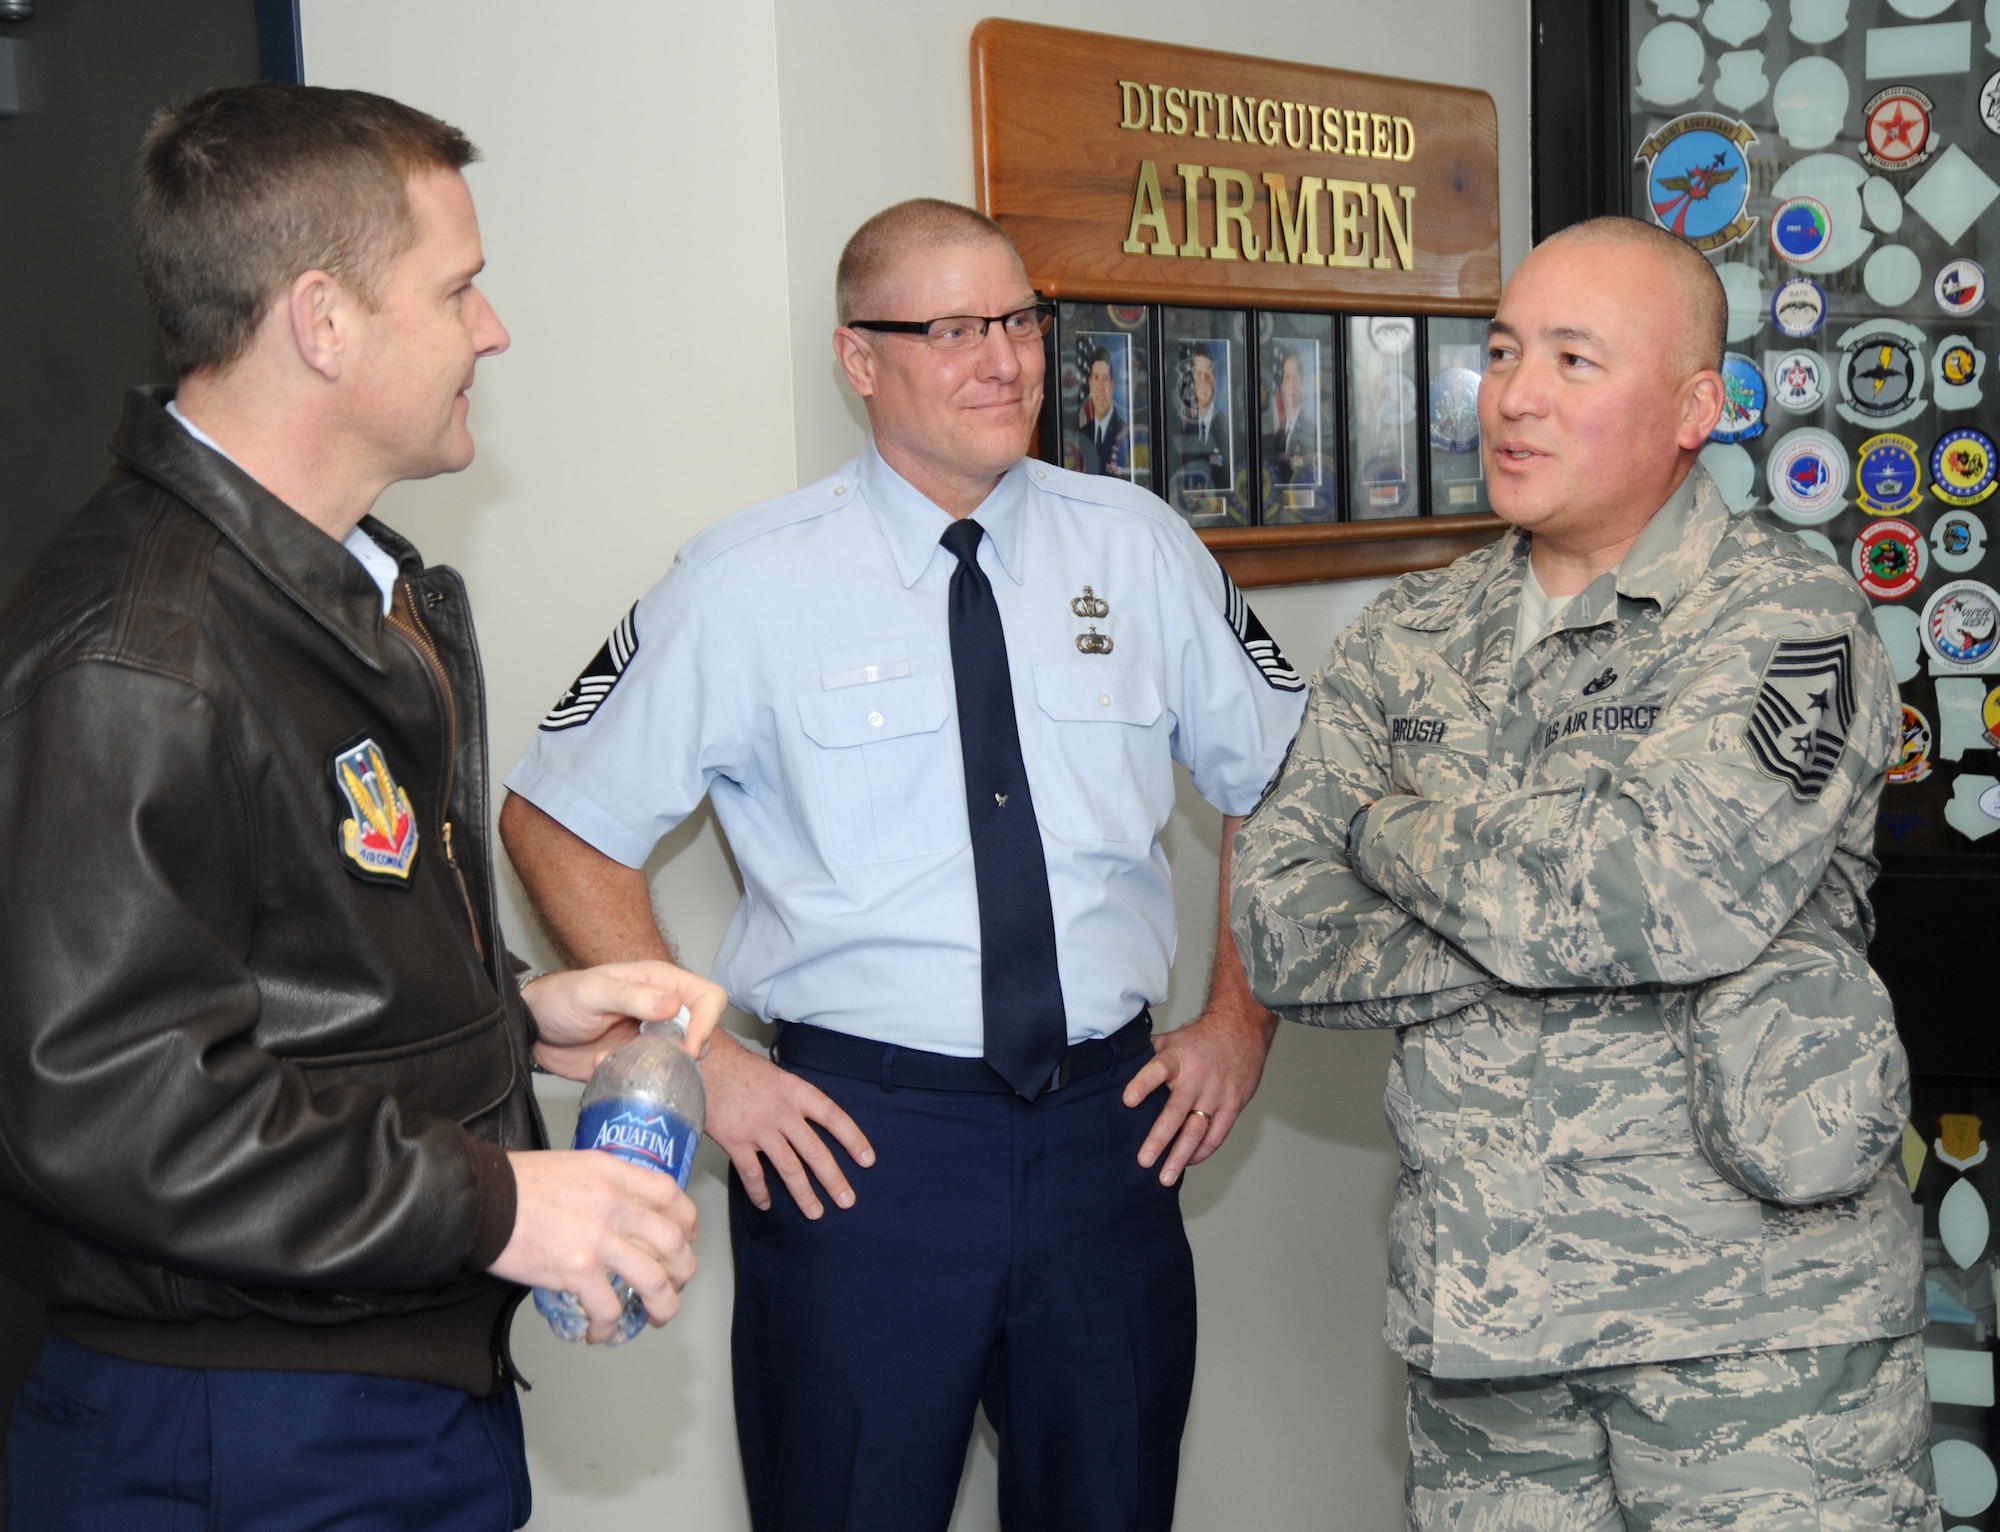 Chief Master Sgt. Mitchell O. Brush, Senior Enlisted Advisor for the National Guard Bureau, right, is greeted by Col. Rick Wedan, 142nd Fighter Wing commander, left, and Chief Master Sgt. David Fry, command post superintendent, assigned to the 142nd Fighter Wing, center, Portland, Ore., Jan. 5, 2015. Chief Brush toured the air base and led a town hall event to highlight the changes and challenges that Soldiers and Airmen of the National Guard face going into the New Year. (U.S. Air National Guard photo by Tech. Sgt. John Hughel, 142nd Fighter Wing Public Affairs/Released)